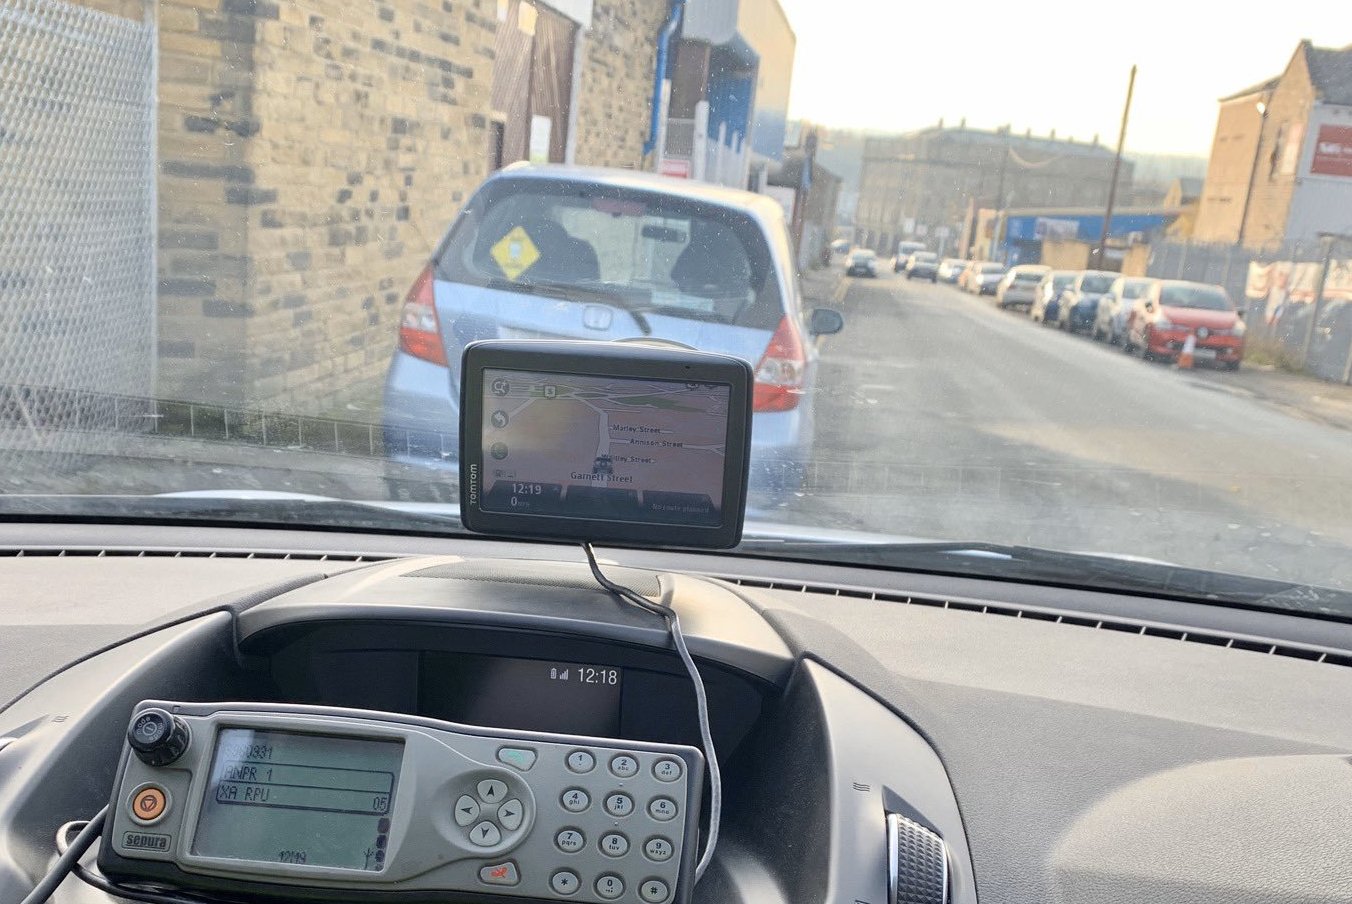 Bradford driver stopped for being a nuisance